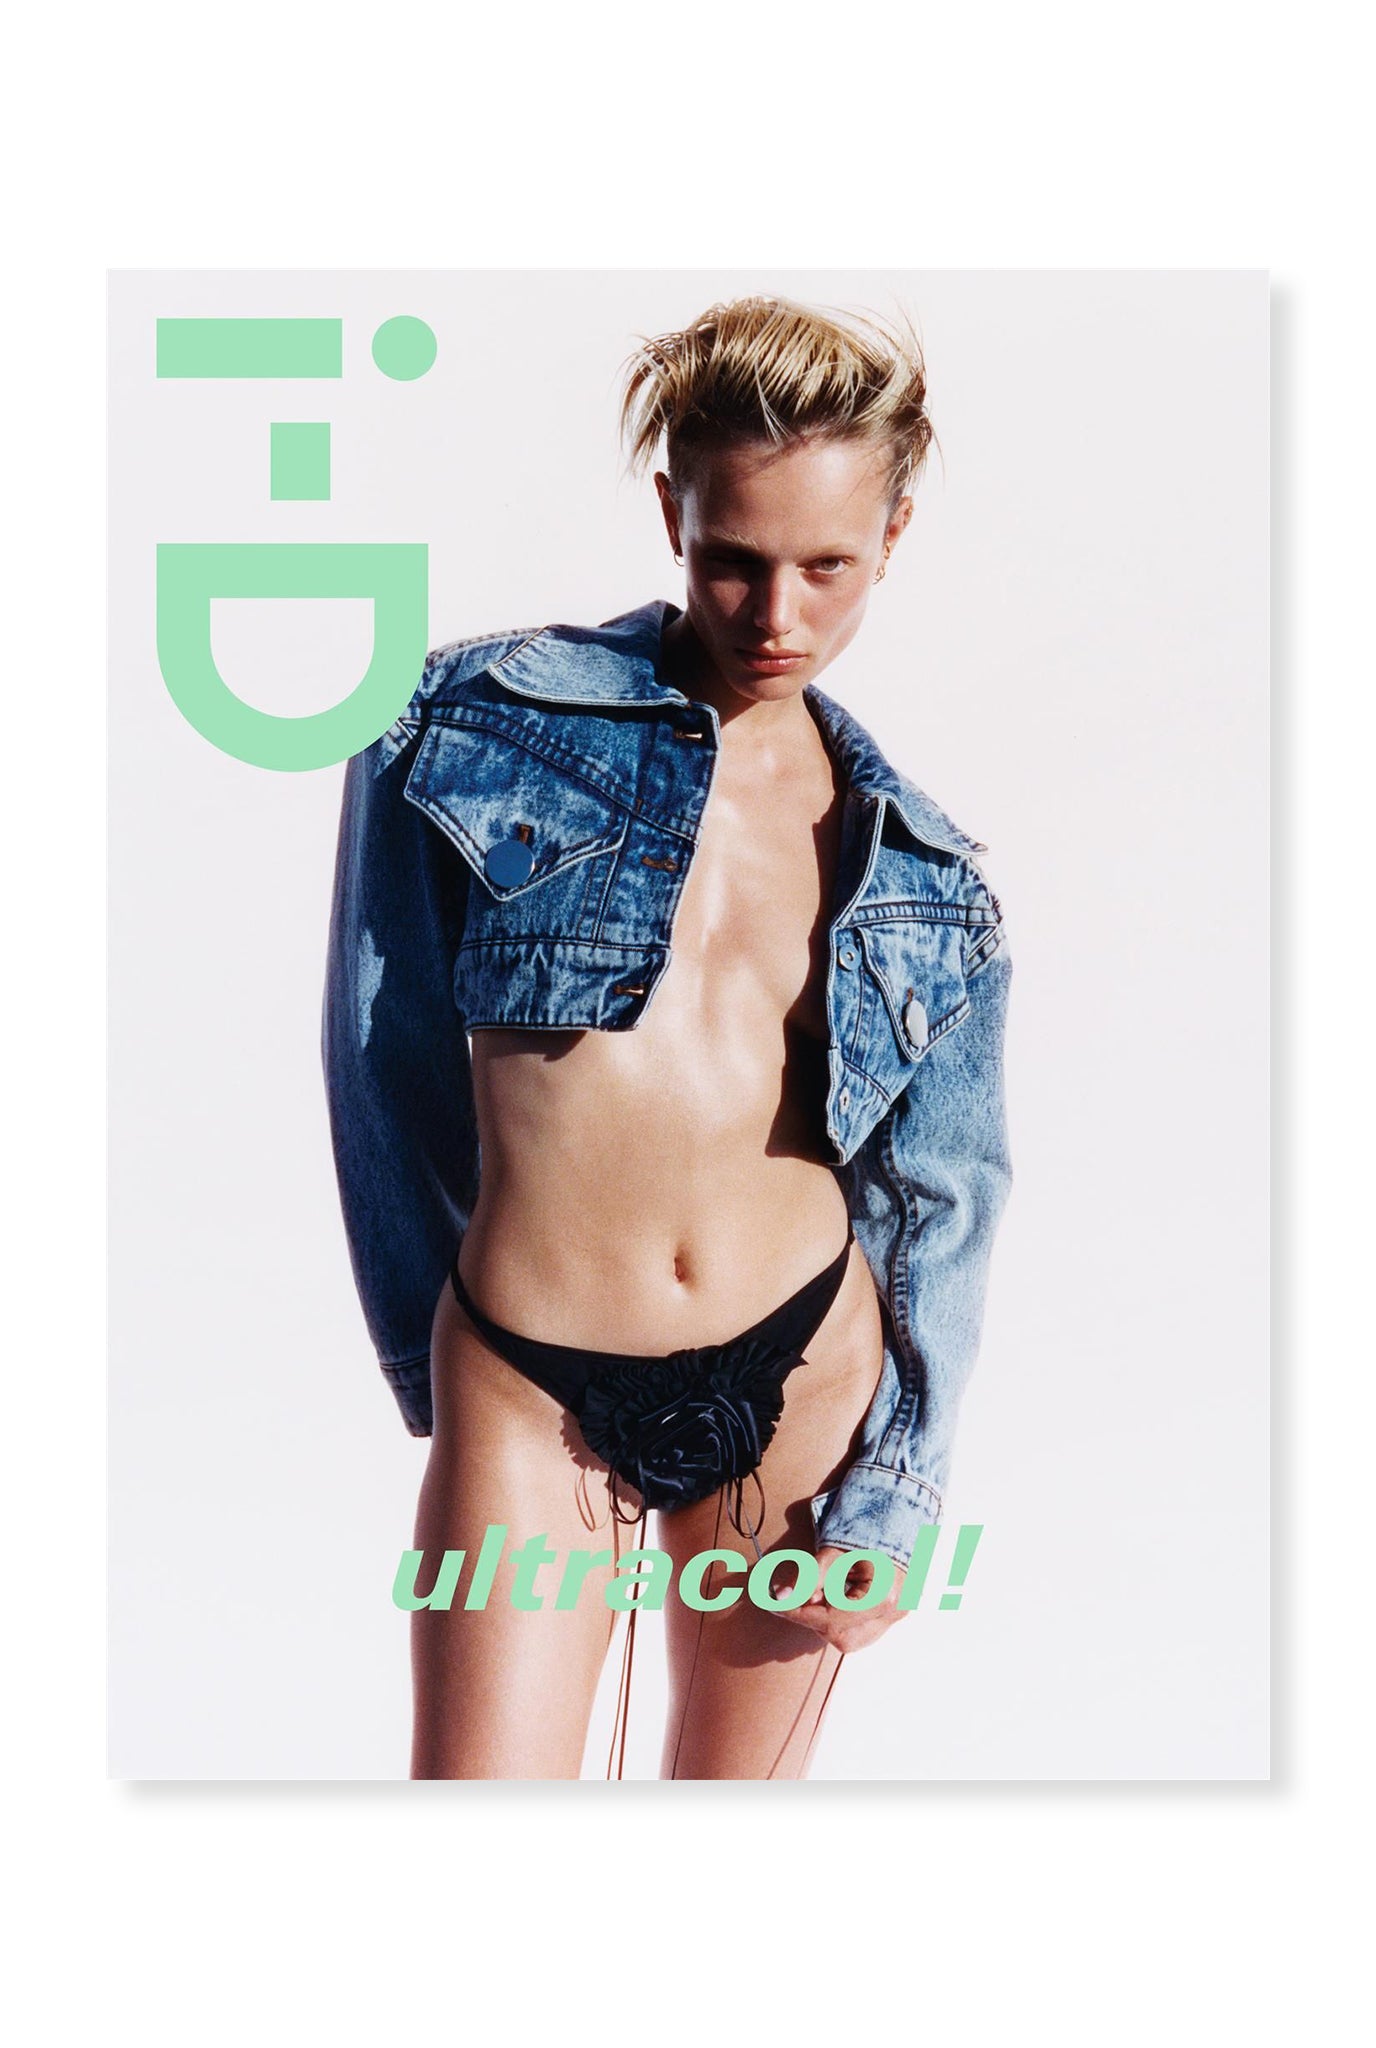 i-D, Issue 369 - Ultra!